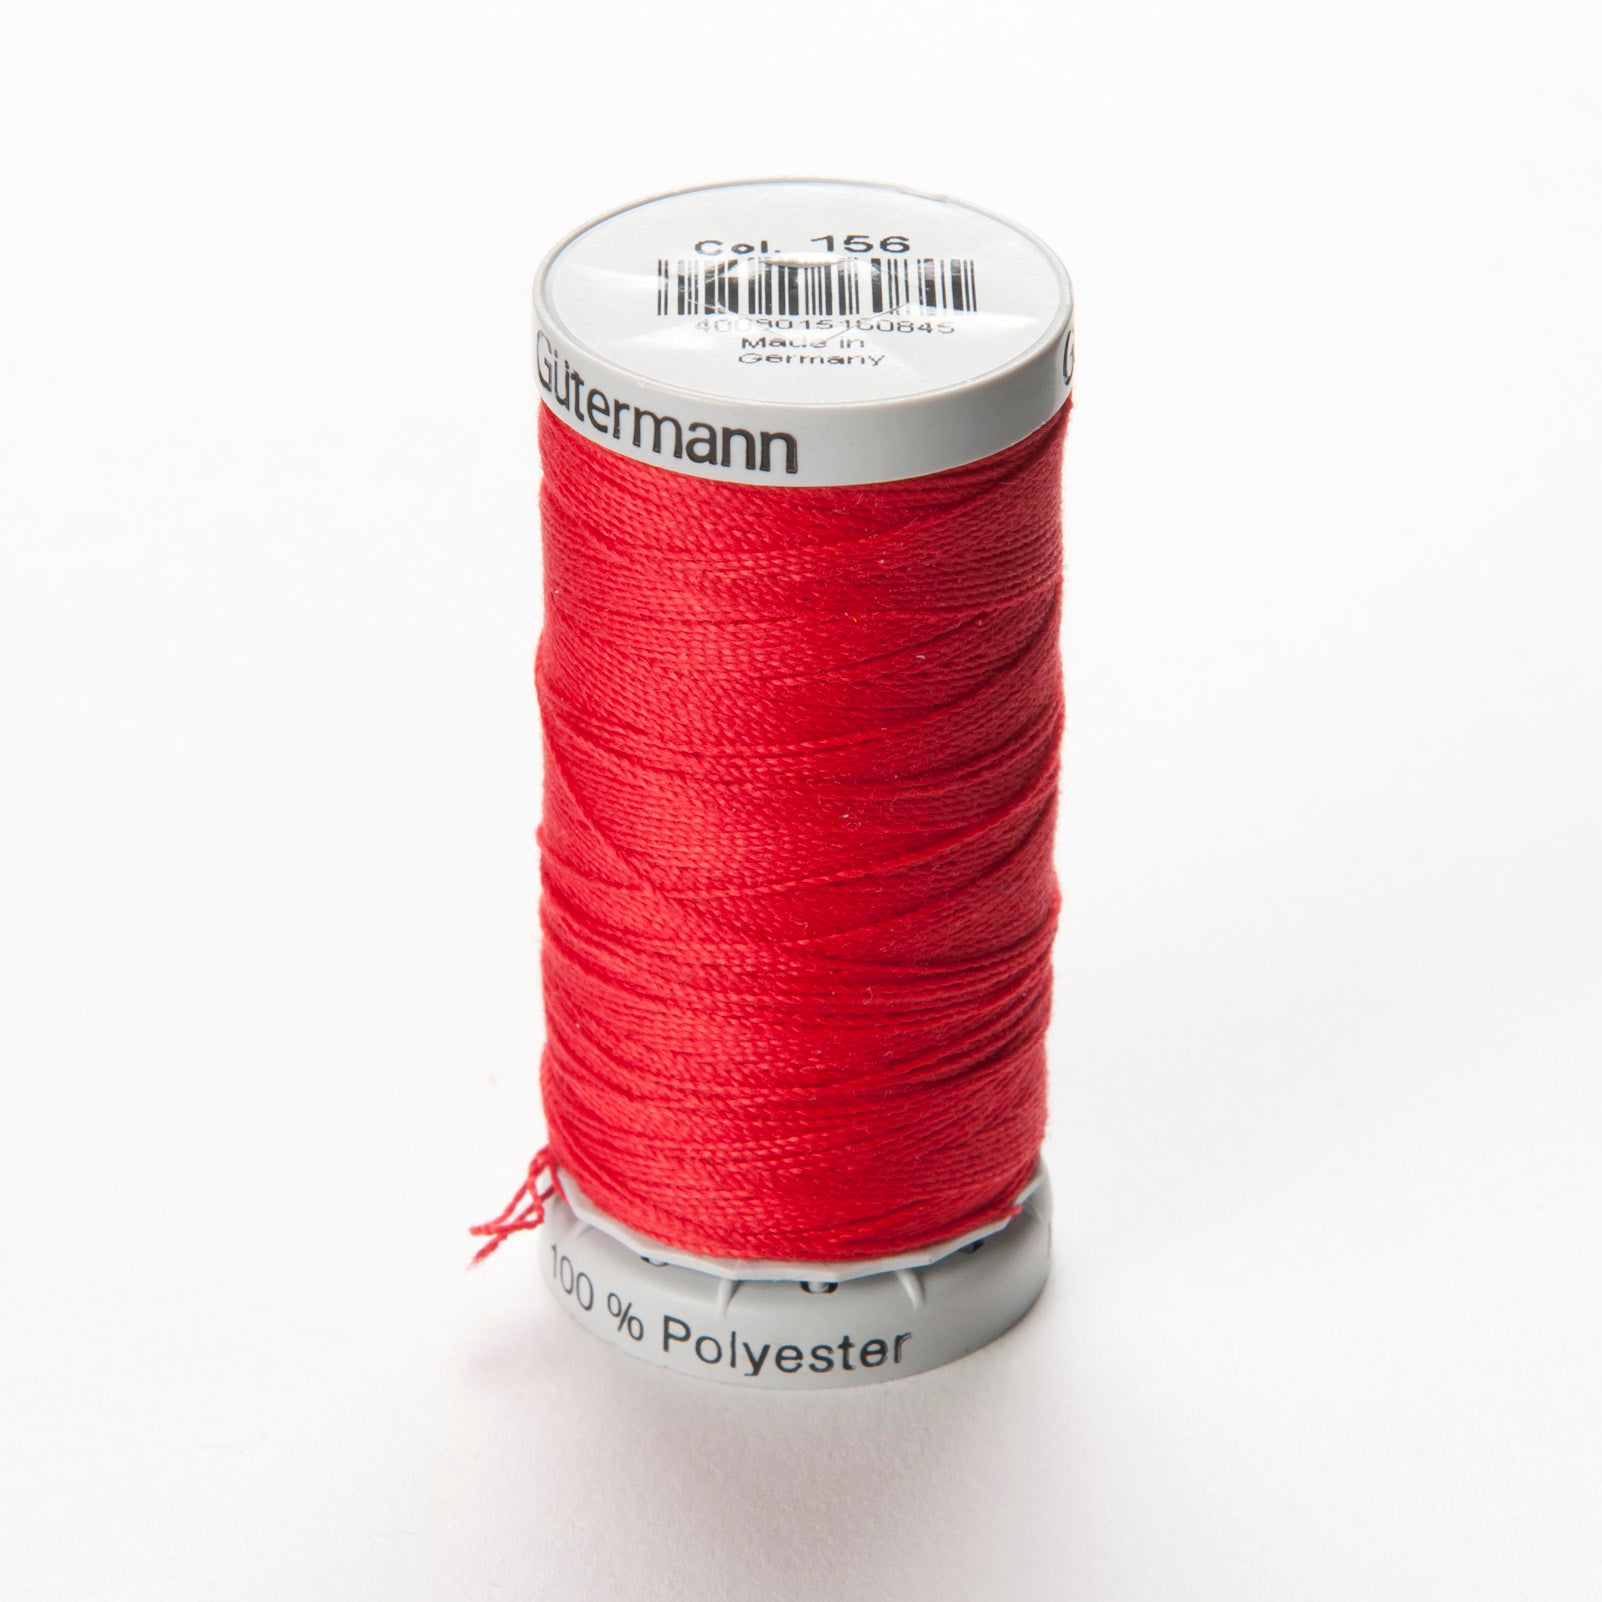 Gutermann 110 Yd Extra Strong Polyester Thread-Sand 